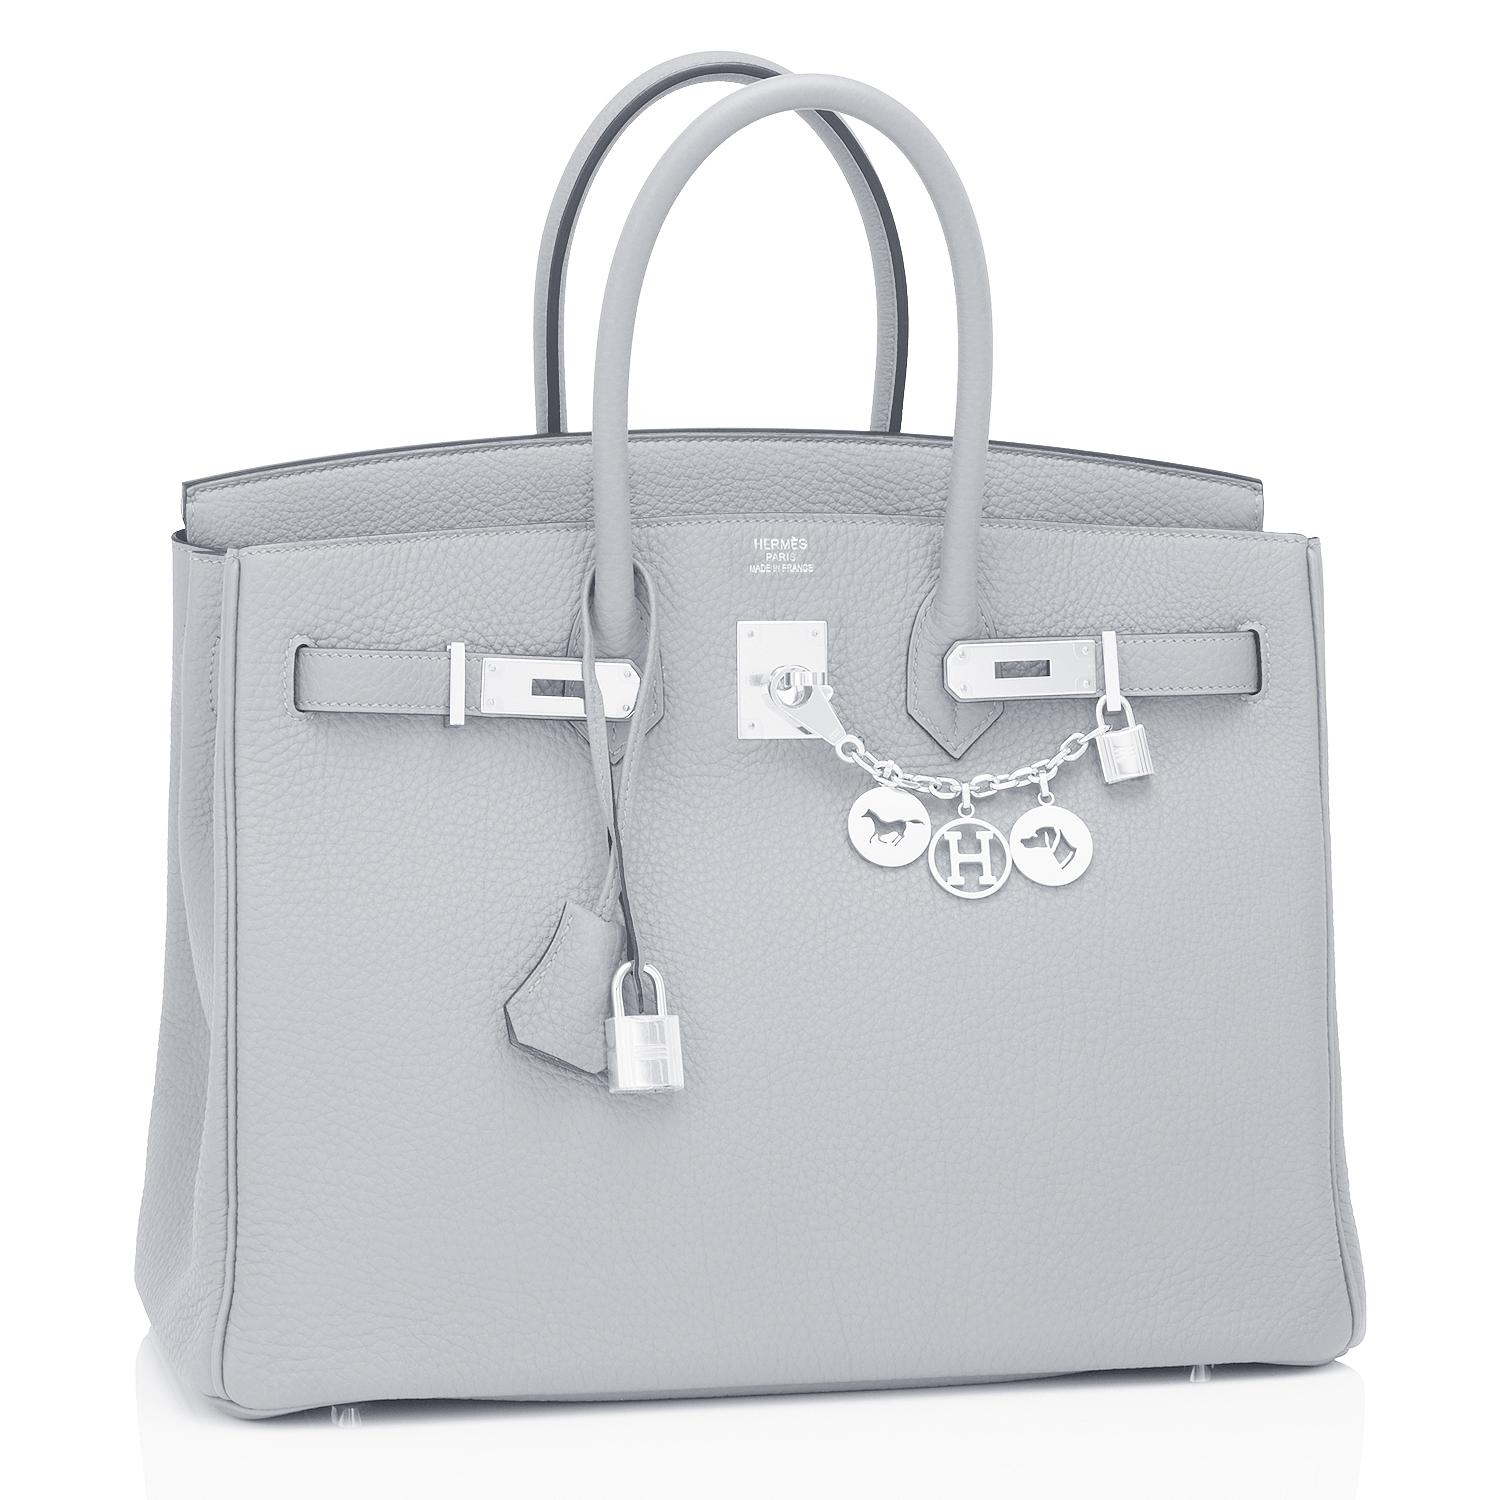 Guaranteed Authentic Hermes Birkin 35cm Blue Pale Bleu Palladium Hardware Bag Y Stamp, 2020
Just purchased from Hermes store; bag bears new interior 2020 Y Stamp.
Brand New in Box in Store Fresh, Pristine Condition (with plastic on hardware)
Perfect